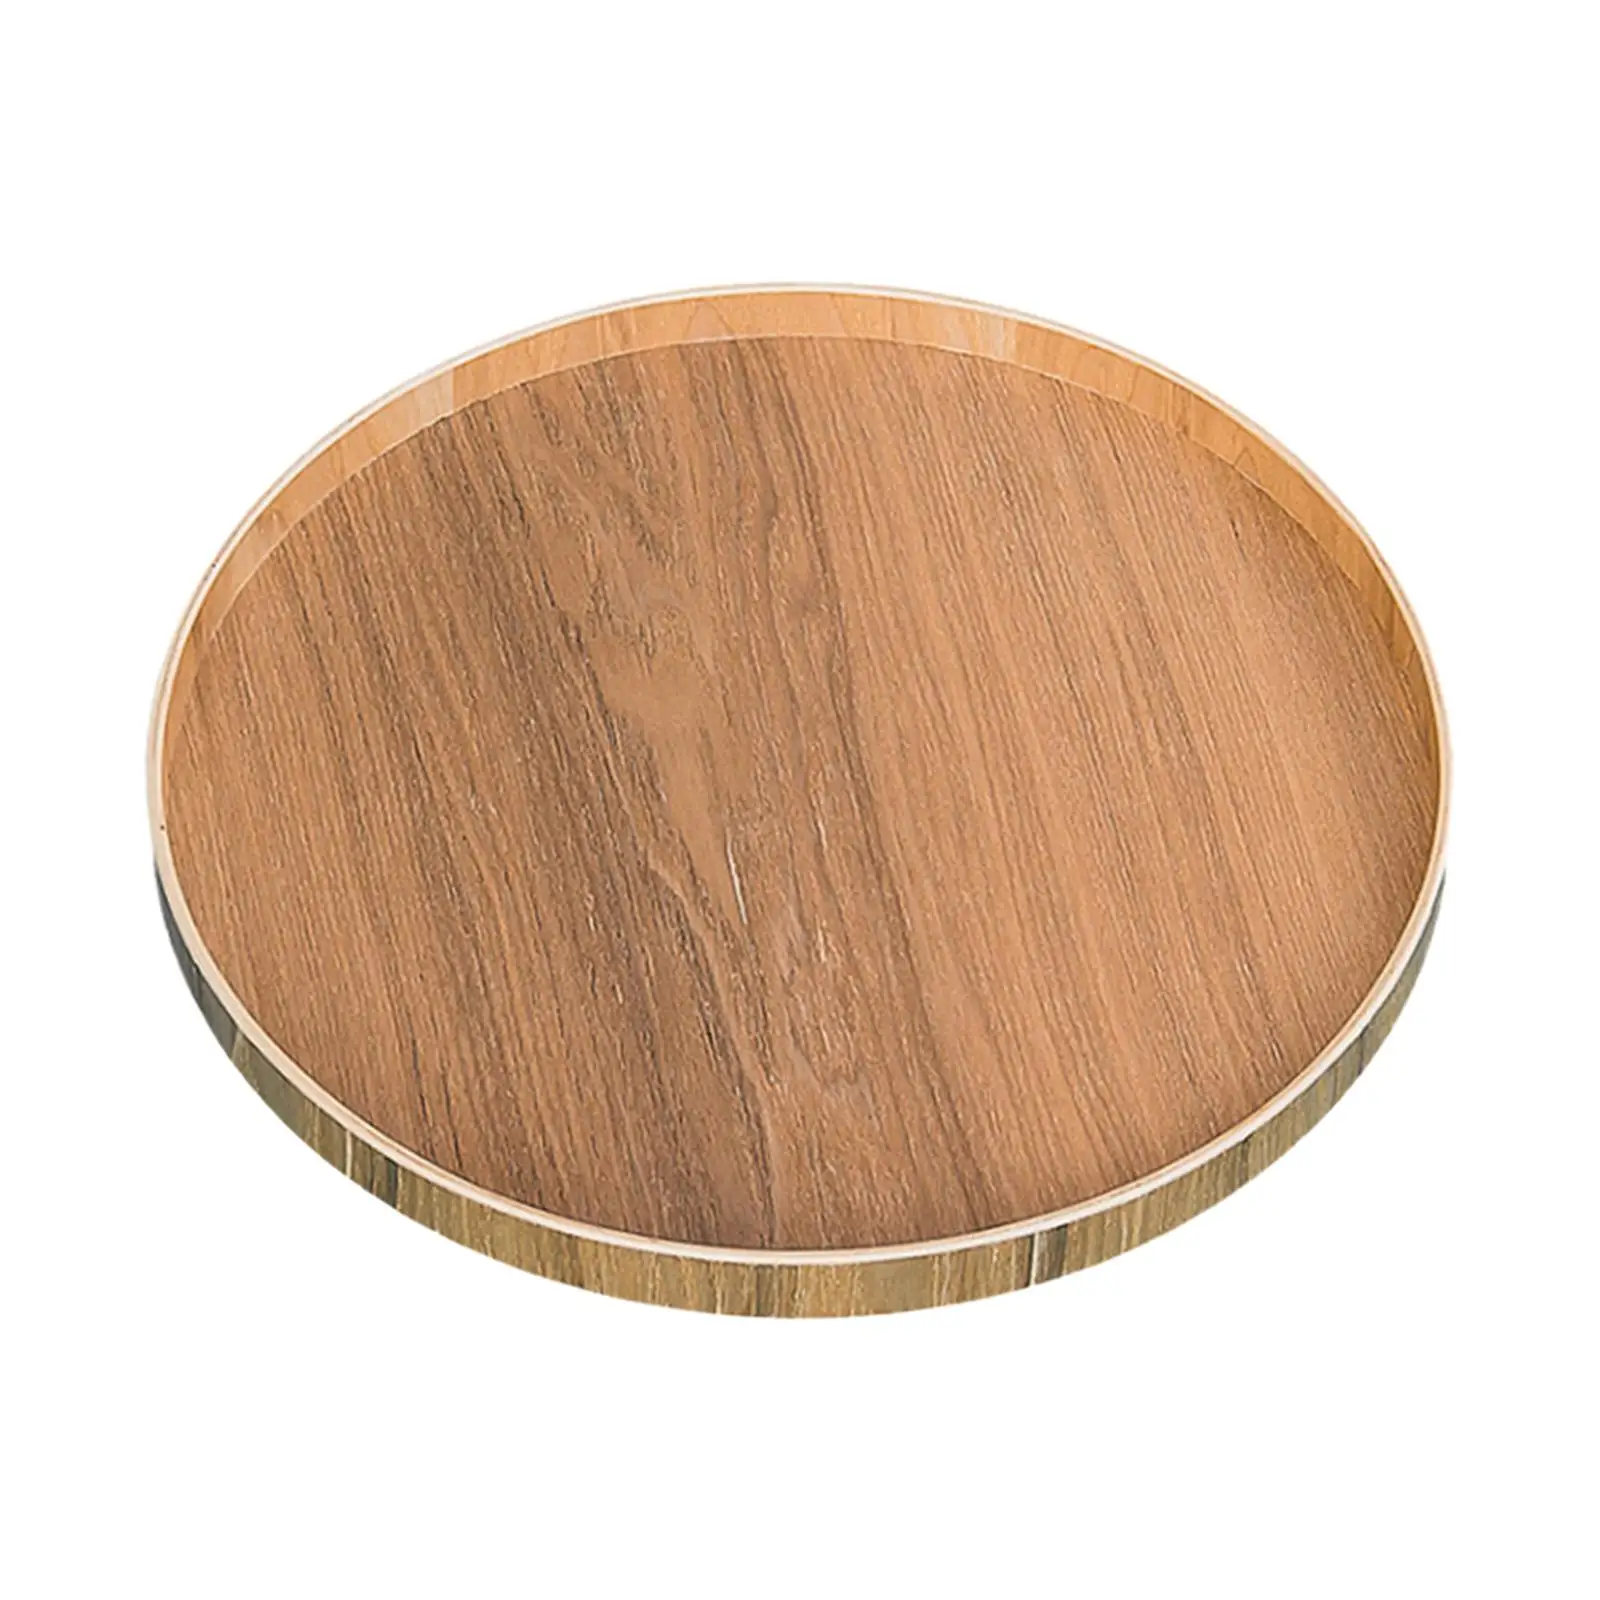 Wooden Serving Tray Multipurpose Farmhouse Decorative Tray Fruit Plate for Home Pantry Kitchen Countertop Bathroom Cabinet